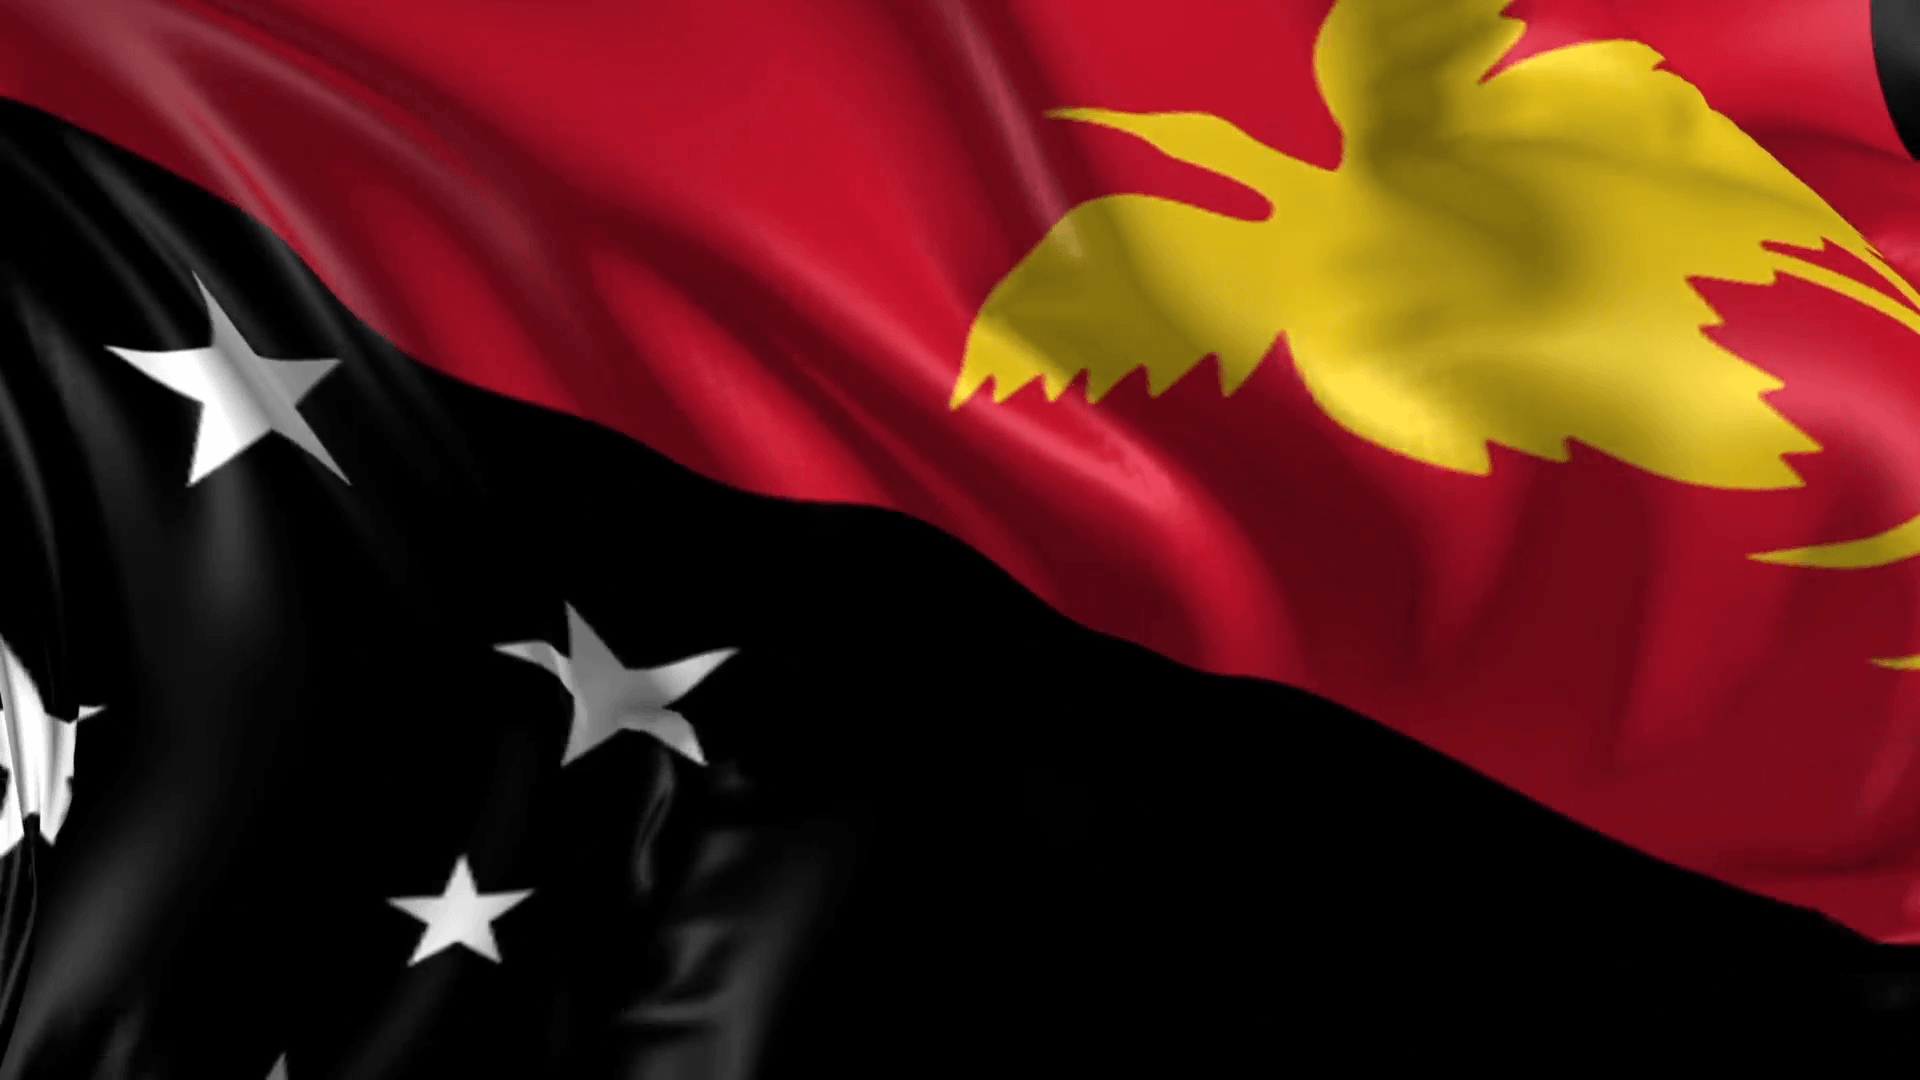 Flag of Papua New Guinea- Beautiful 3D animation of Papua New